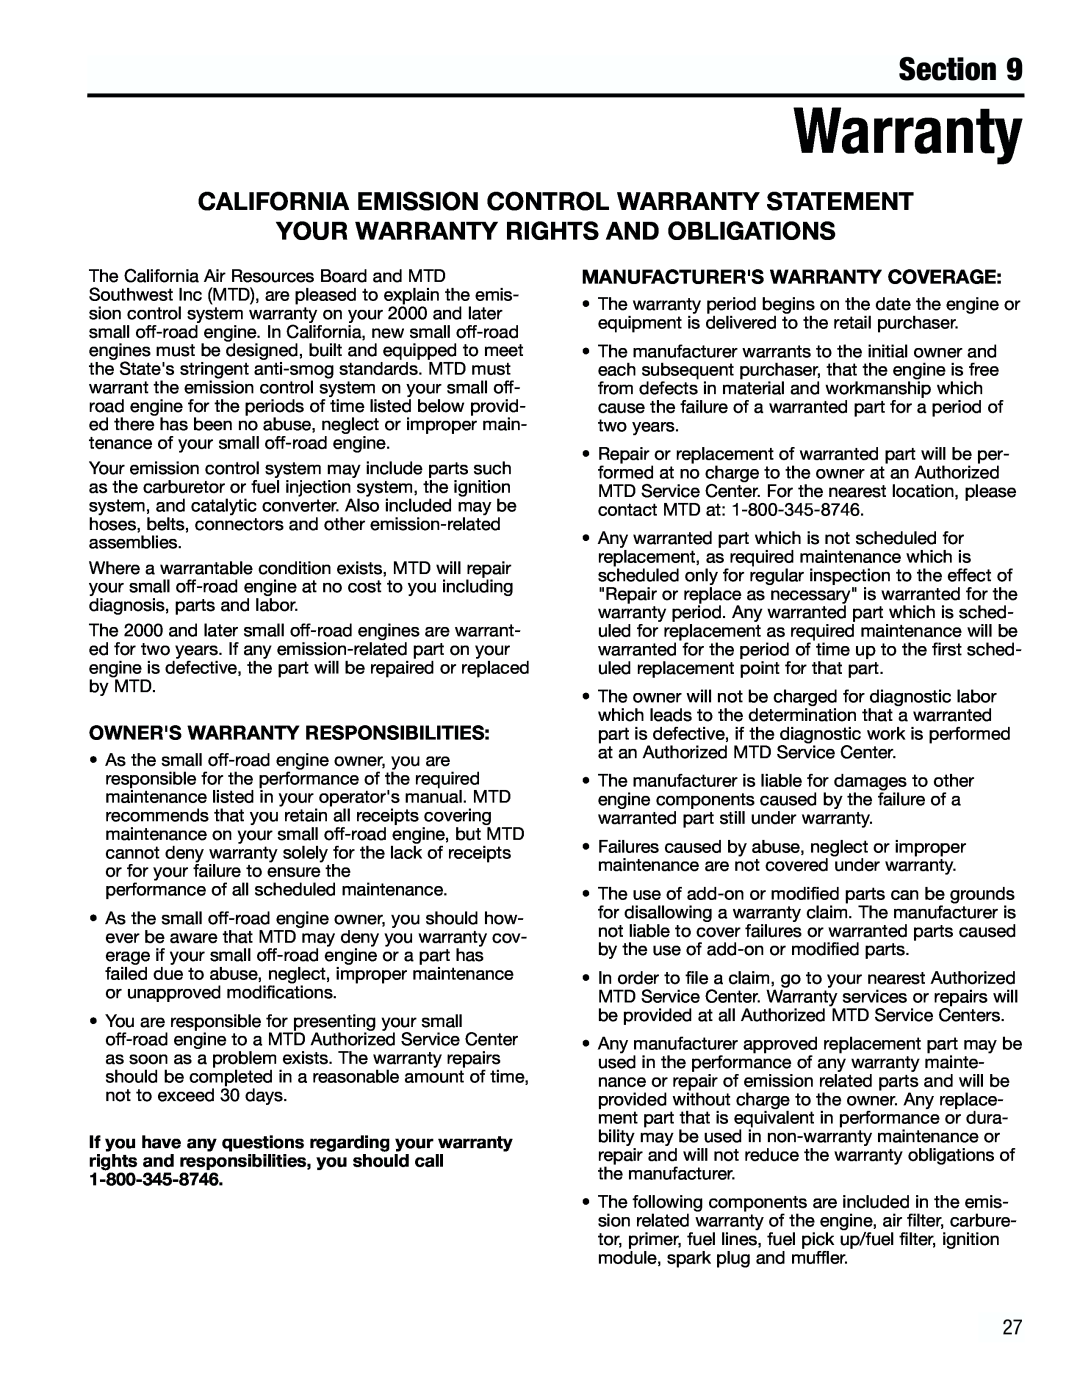 Troy-Bilt TB4000 manual California Emission Control Warranty Statement, Your Warranty Rights And Obligations, Section 